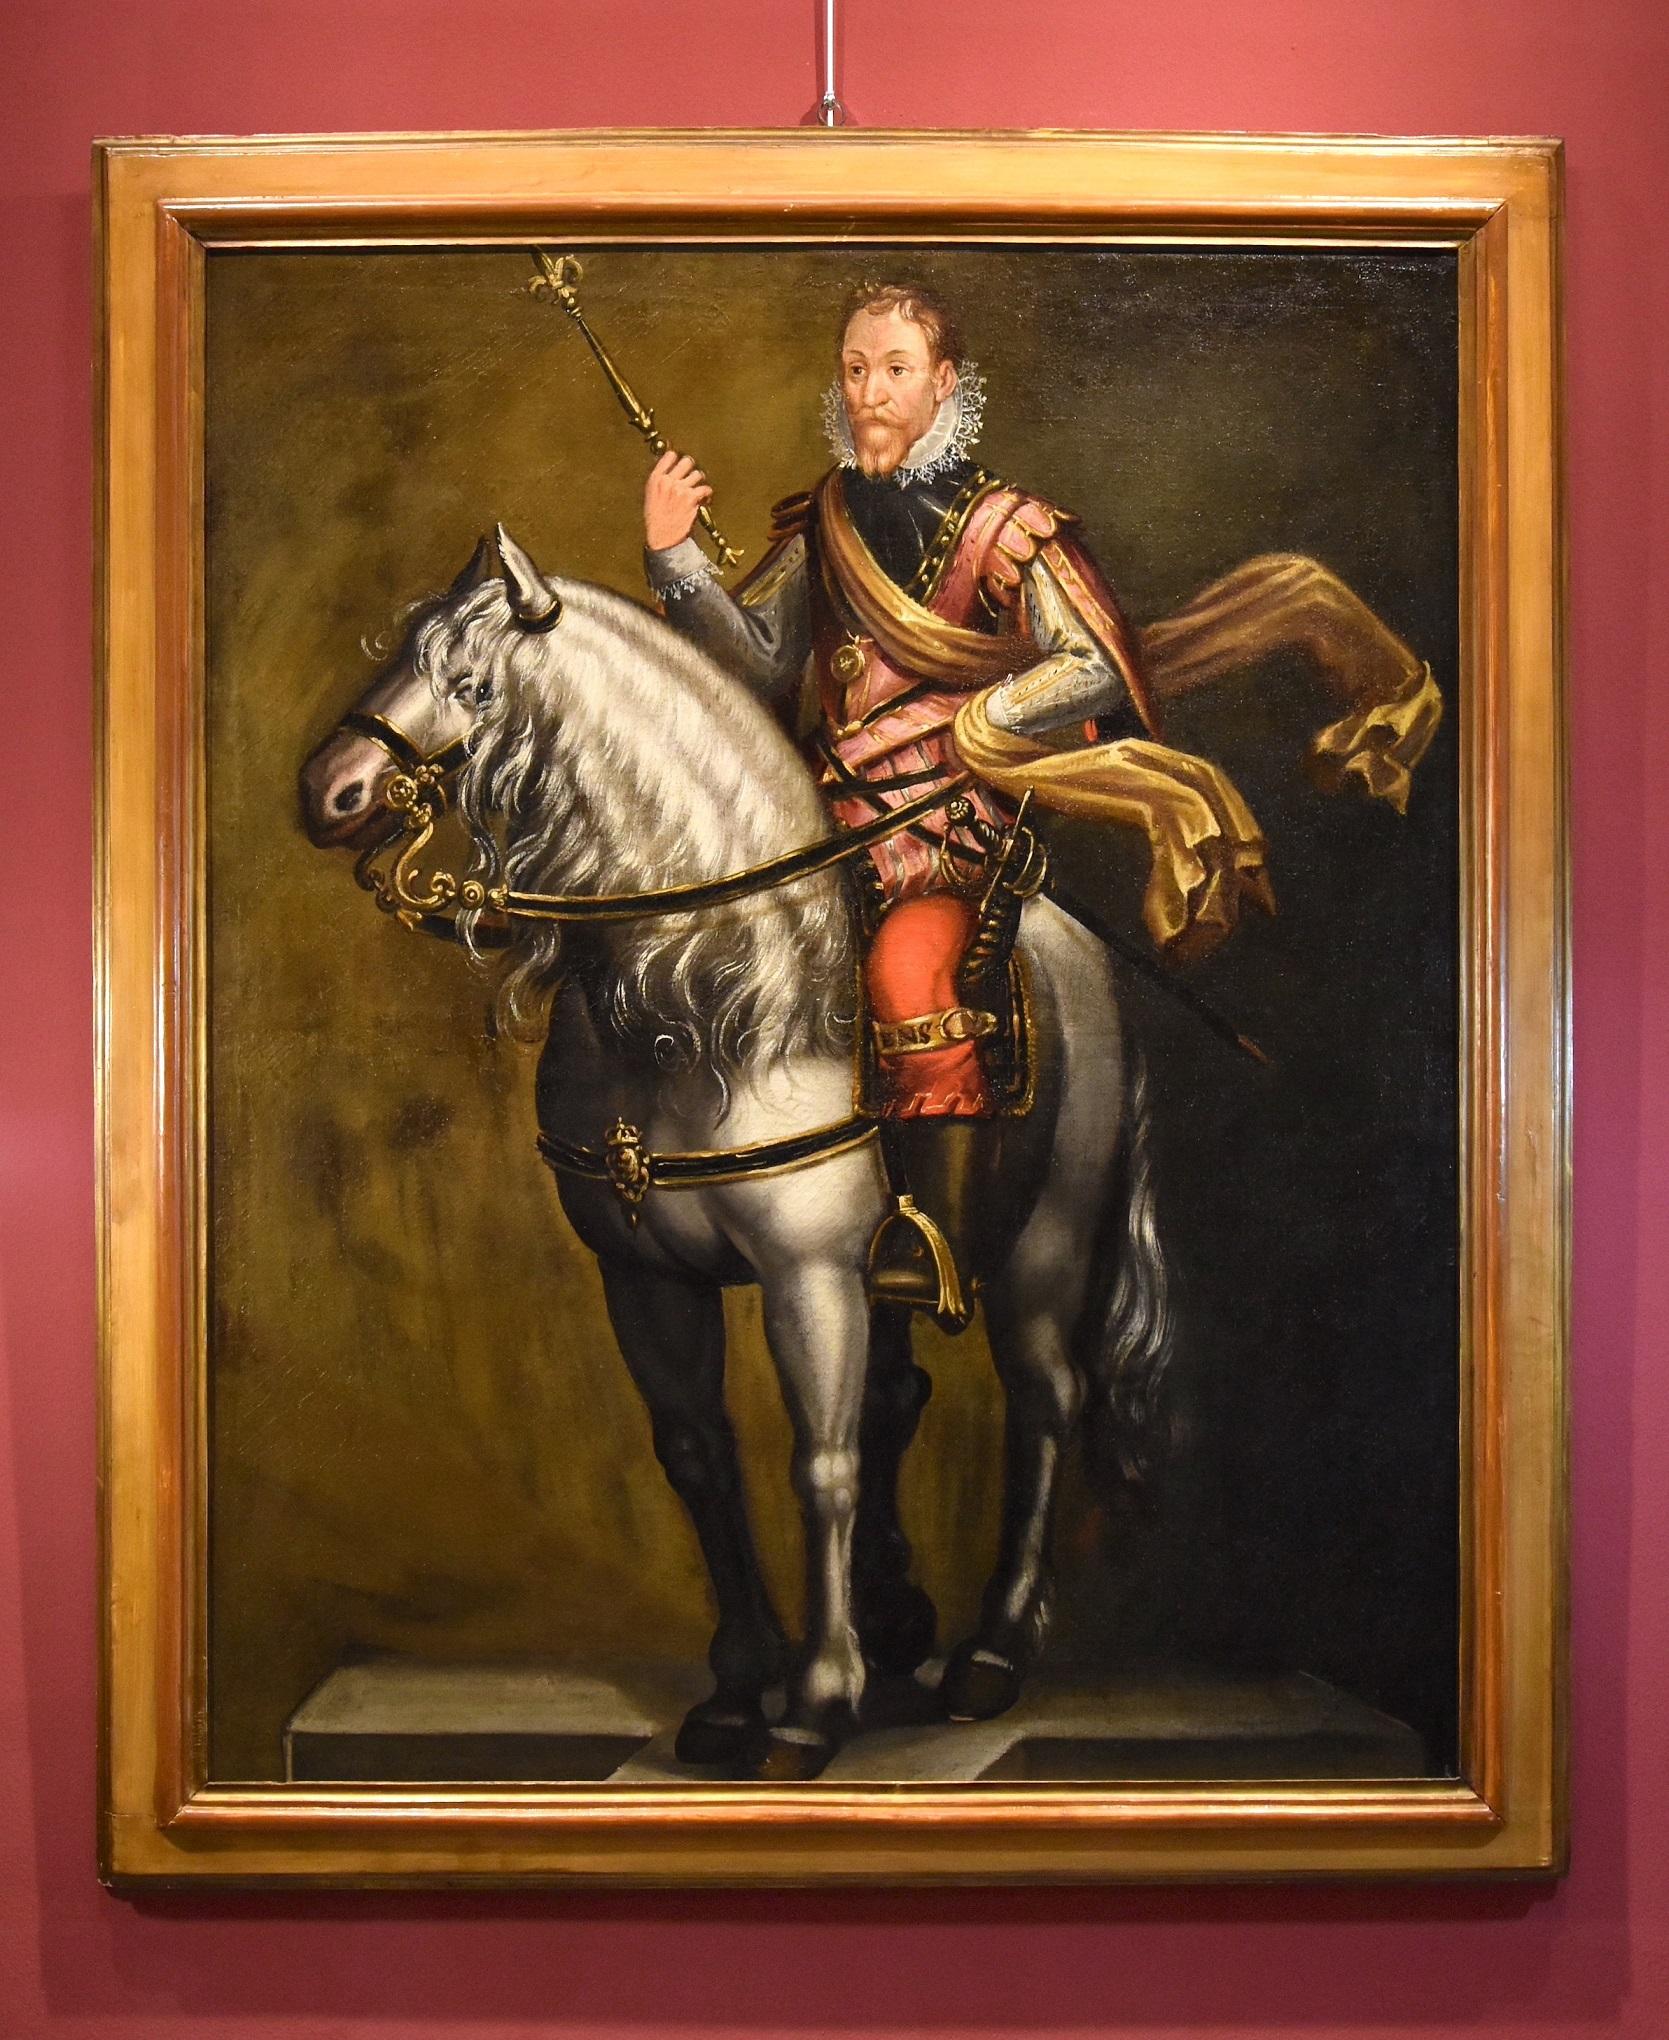 Equestrian Portrait Kraeck Paint Oil on canvas Old master 16/17th Century Italy - Painting by Jan Kraeck, in Italy Giovanni Caracca (Haarlem c. 1540 - Turin 1607) 